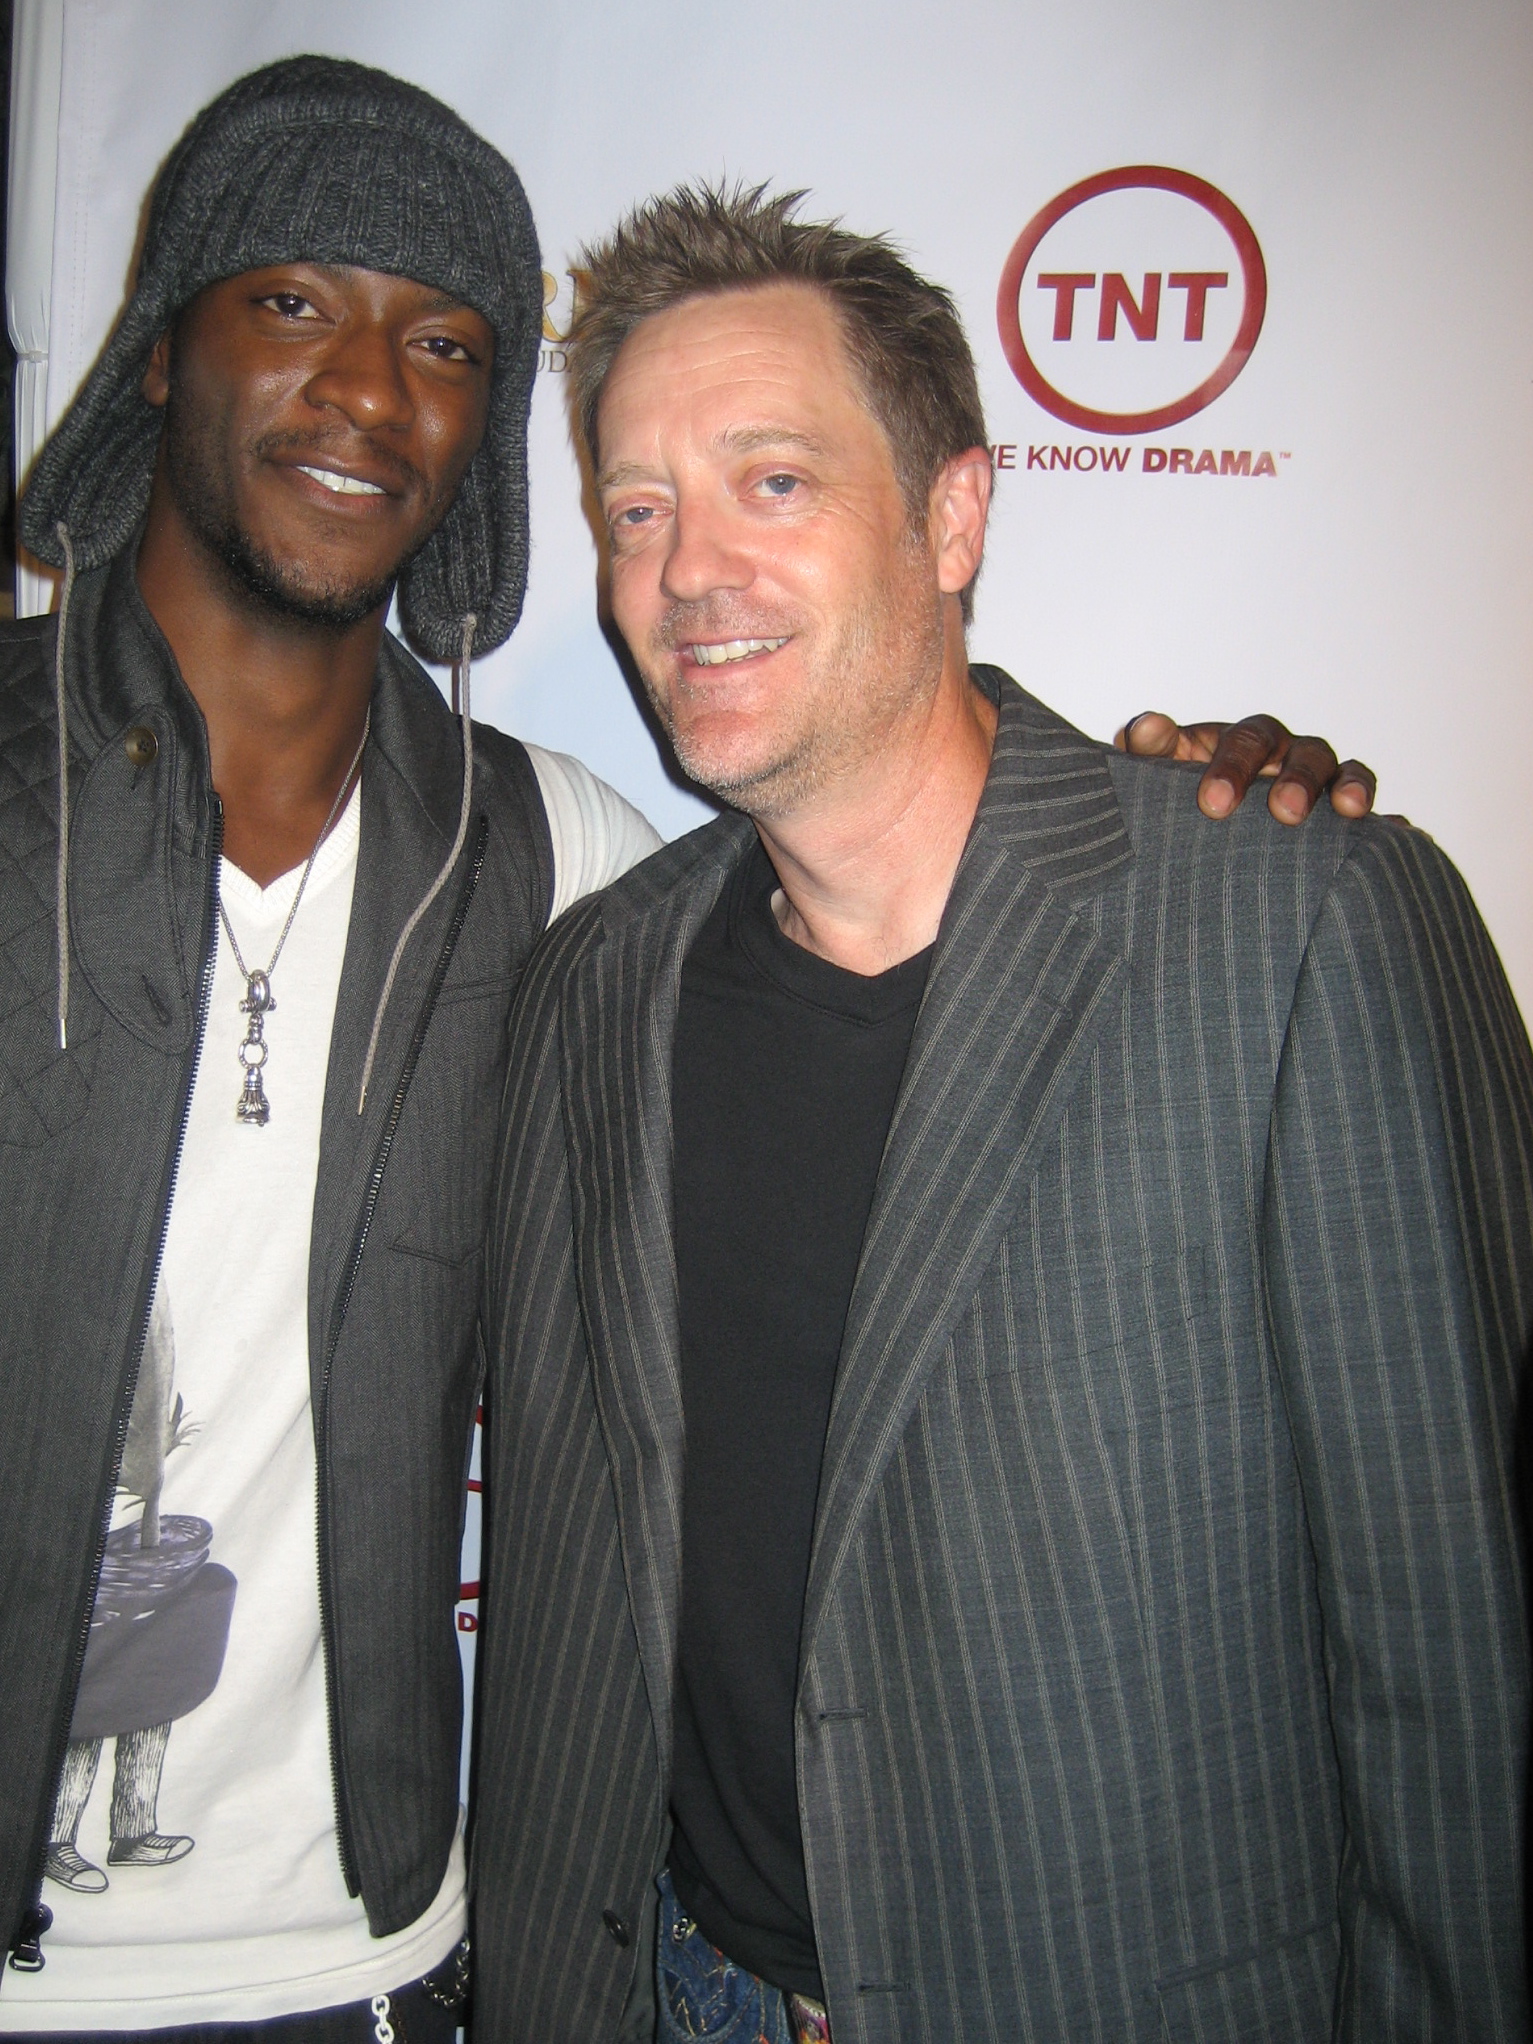 Leverage wrap party with Aldis Hodge and Kirk Bovill.